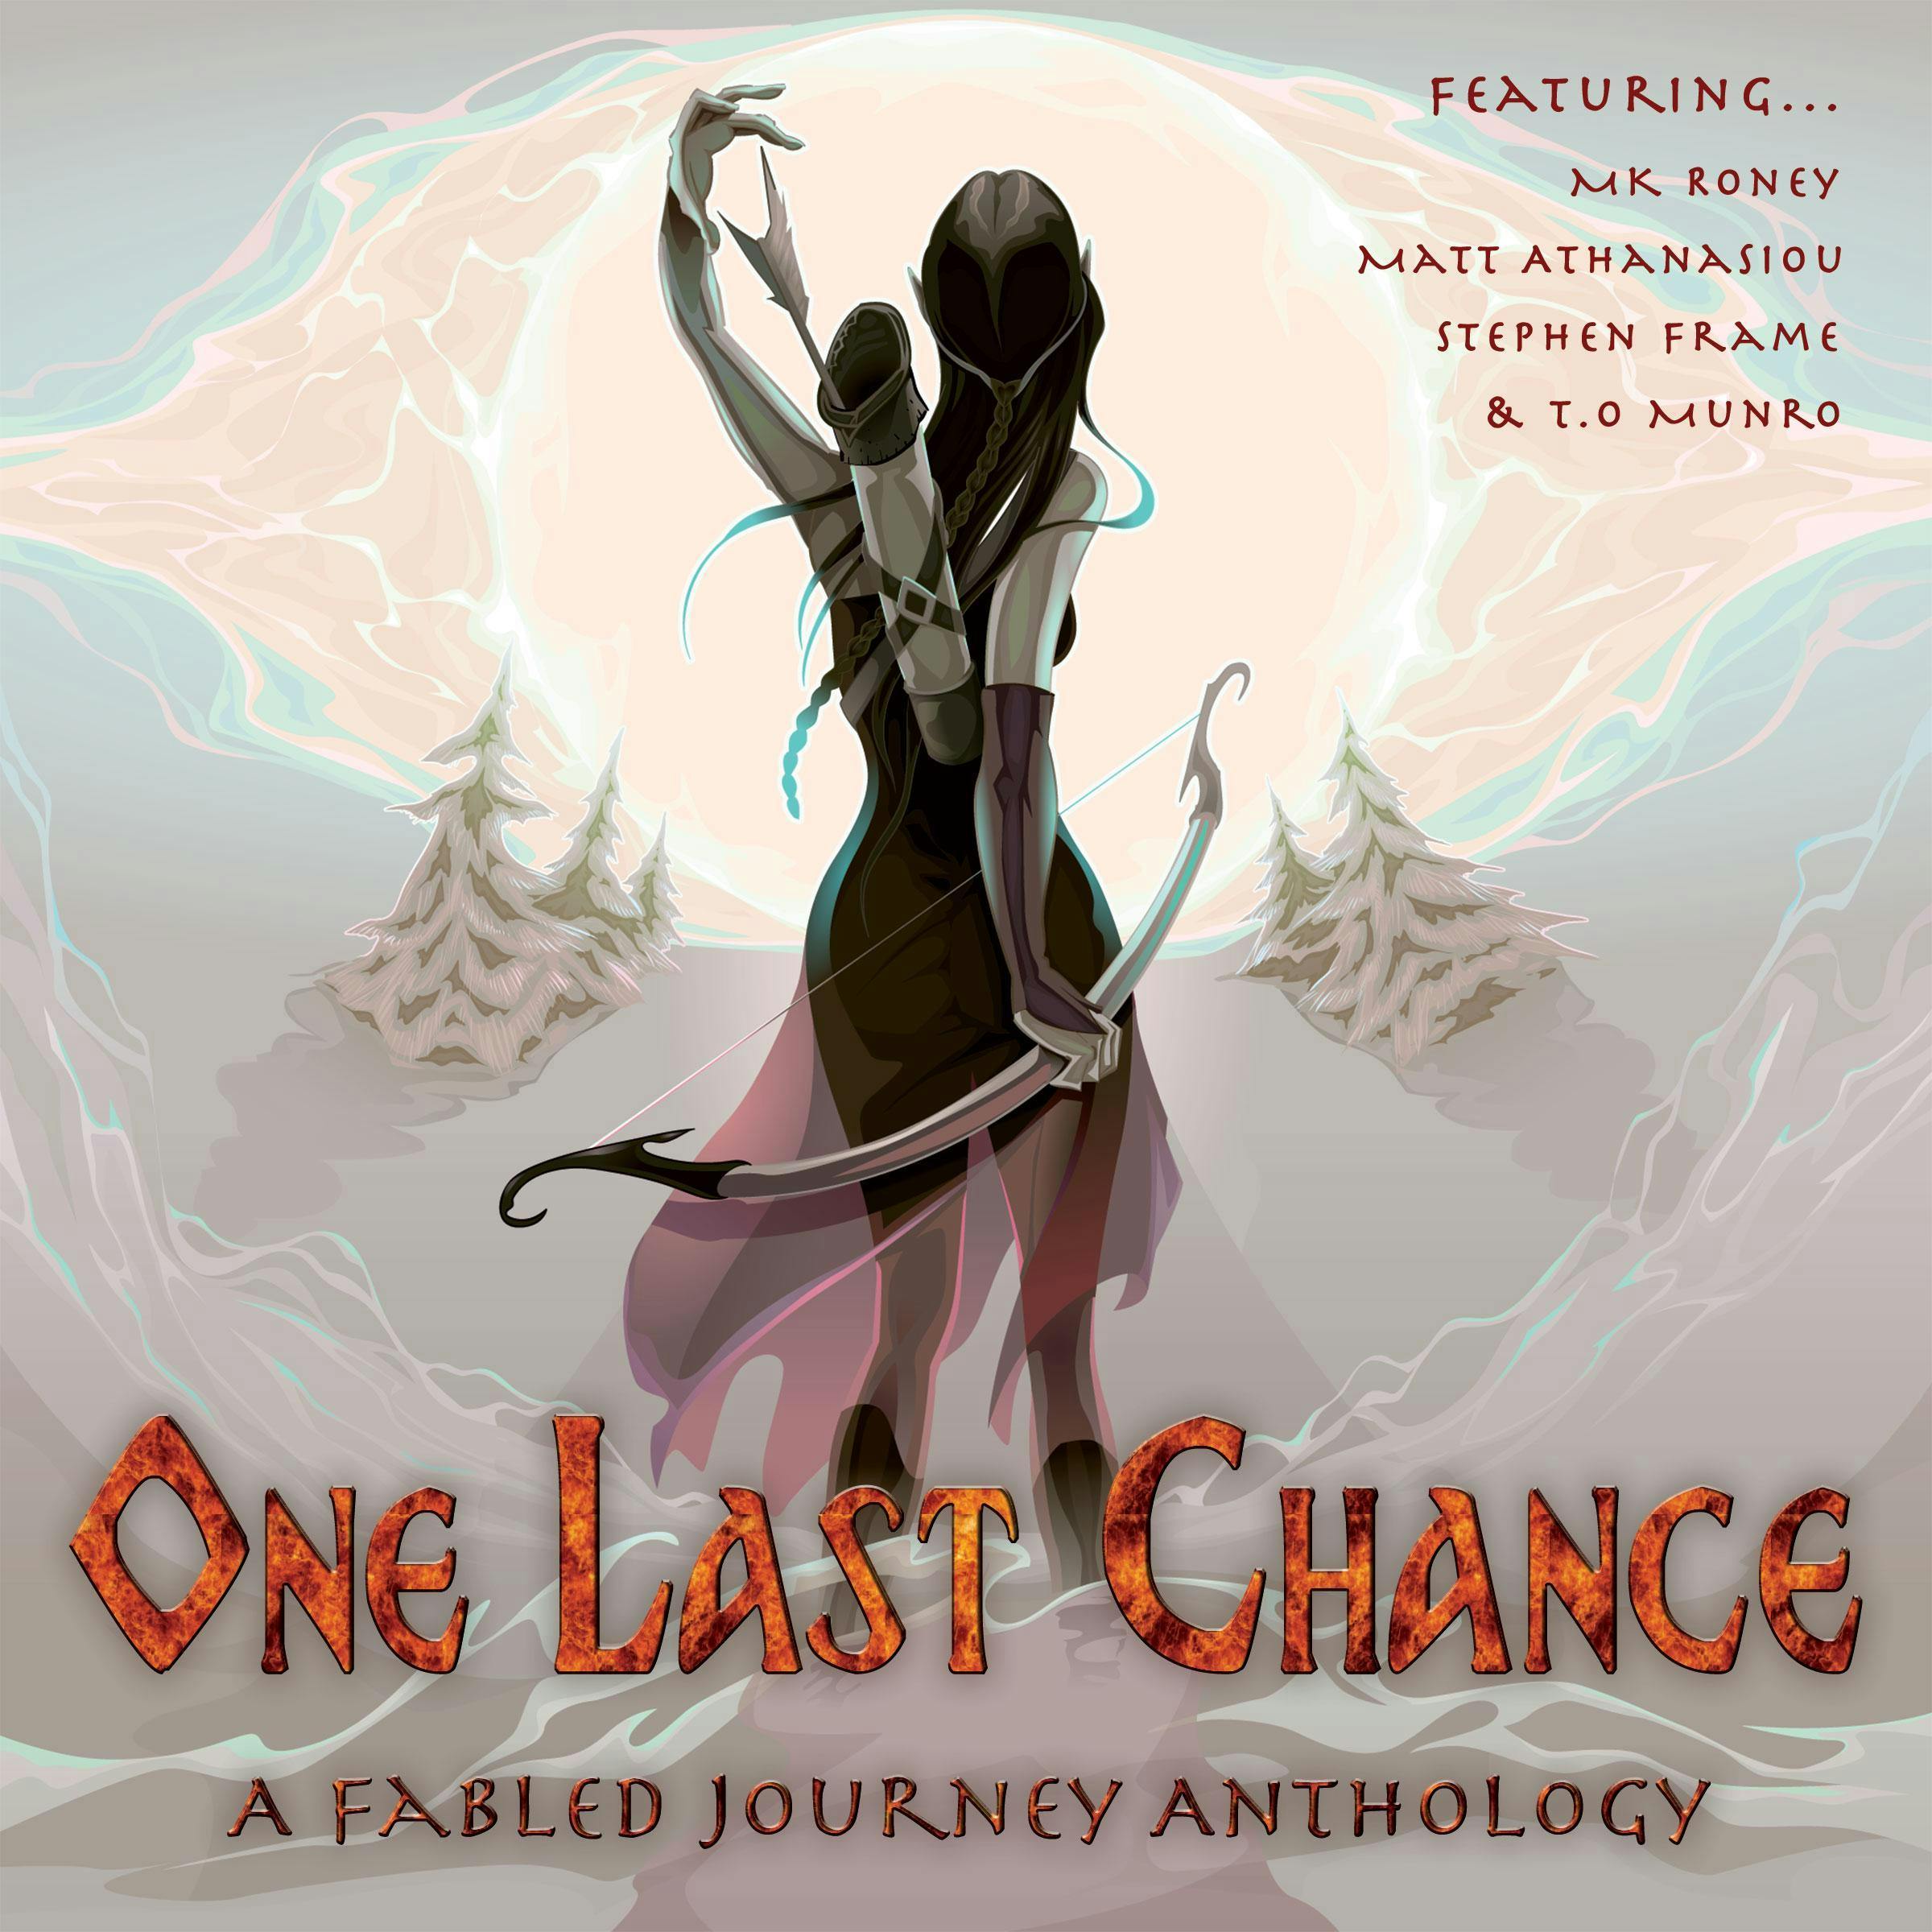 One Last Chance - undefined